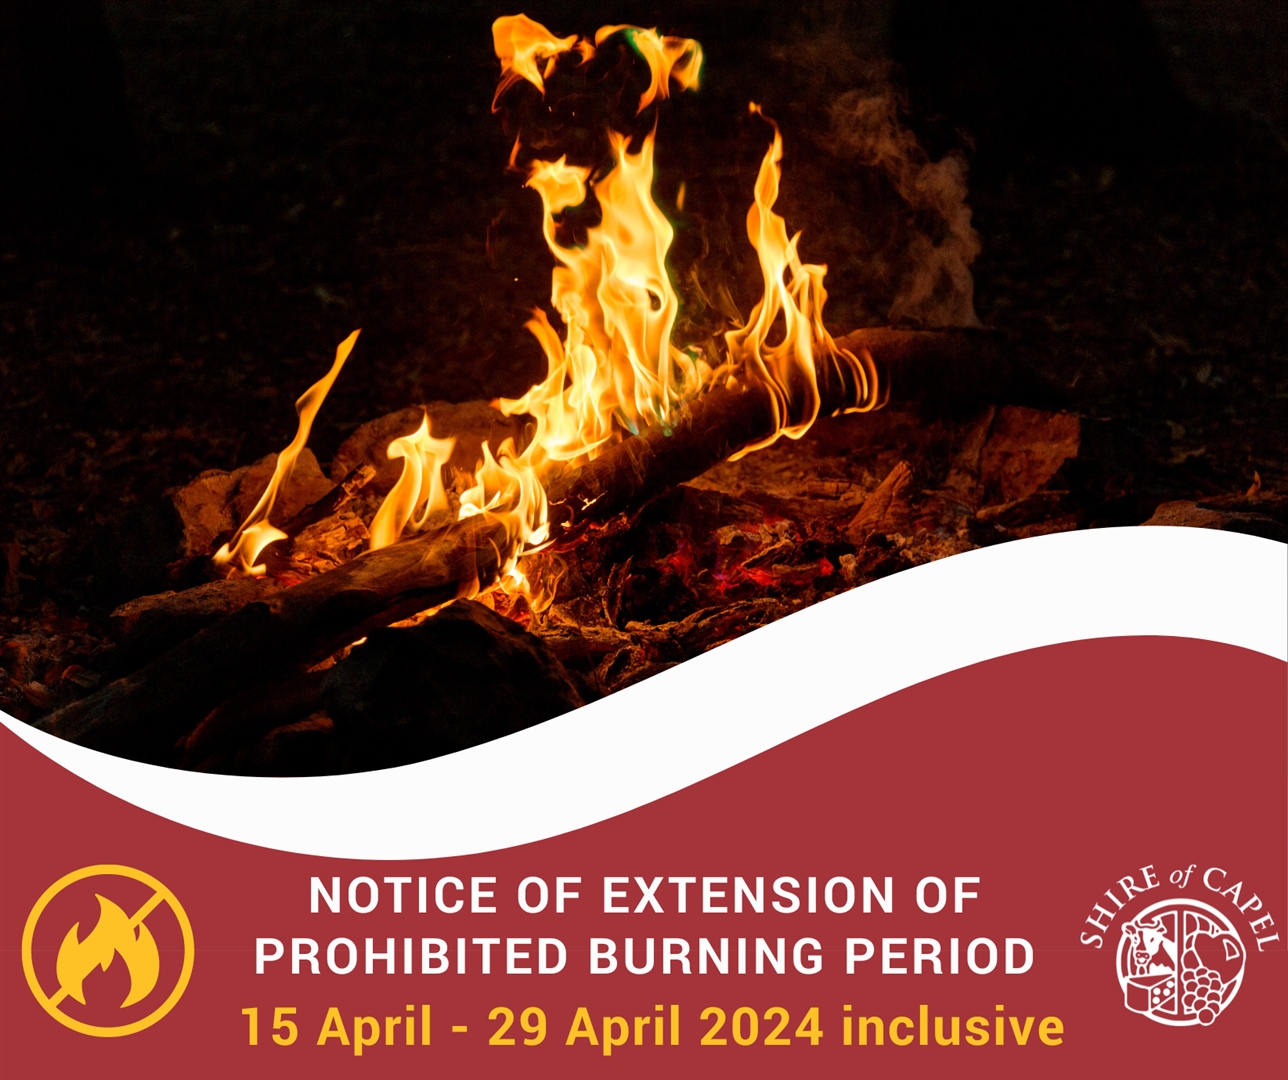 Copy of Notice of Extension of Prohibited Burning Period (3)